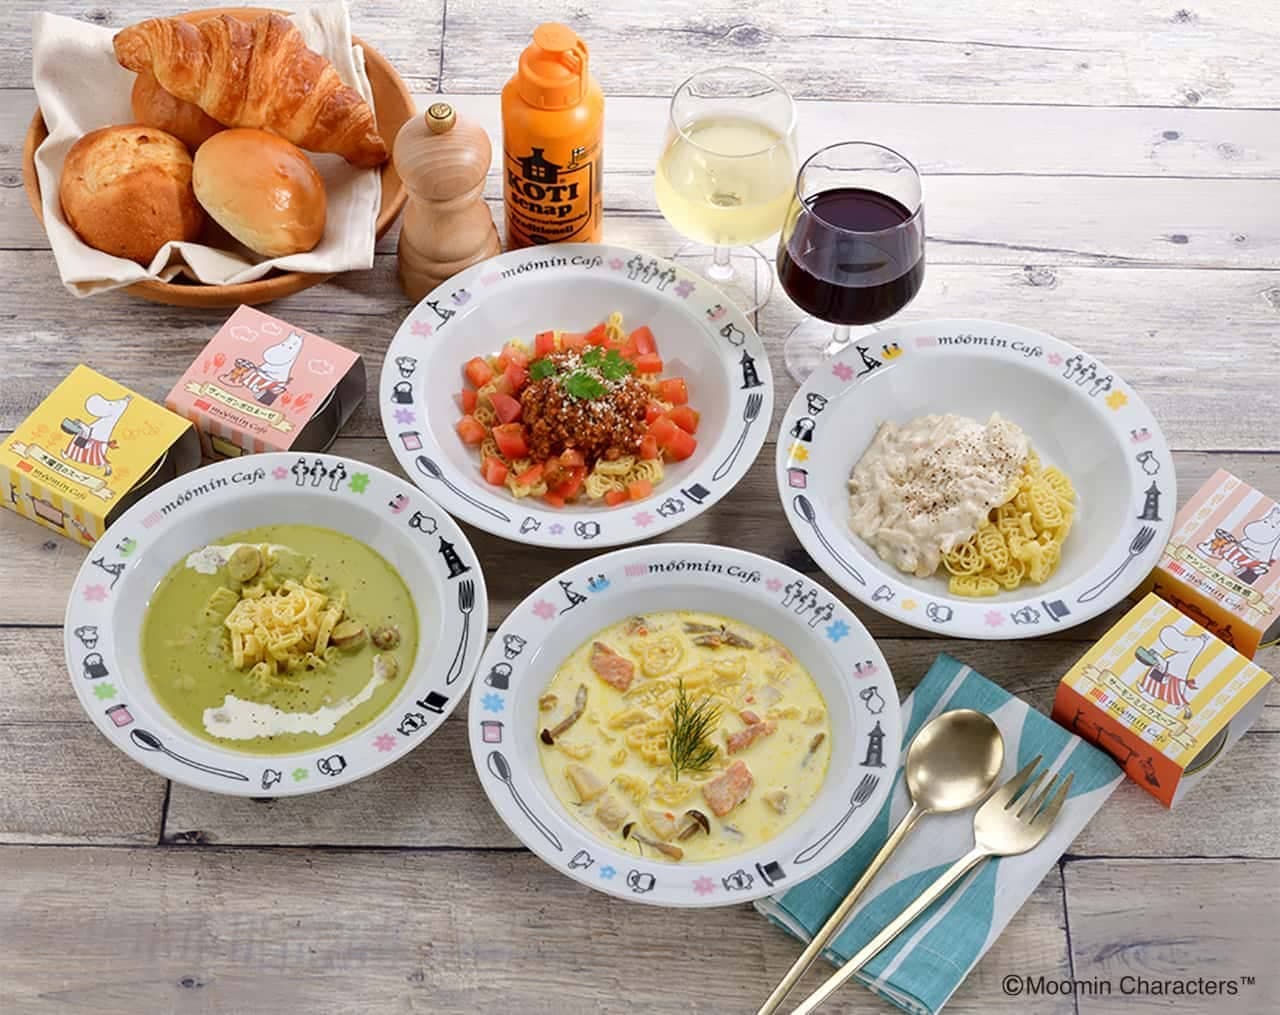 Pasta set produced by Moomin Cafe